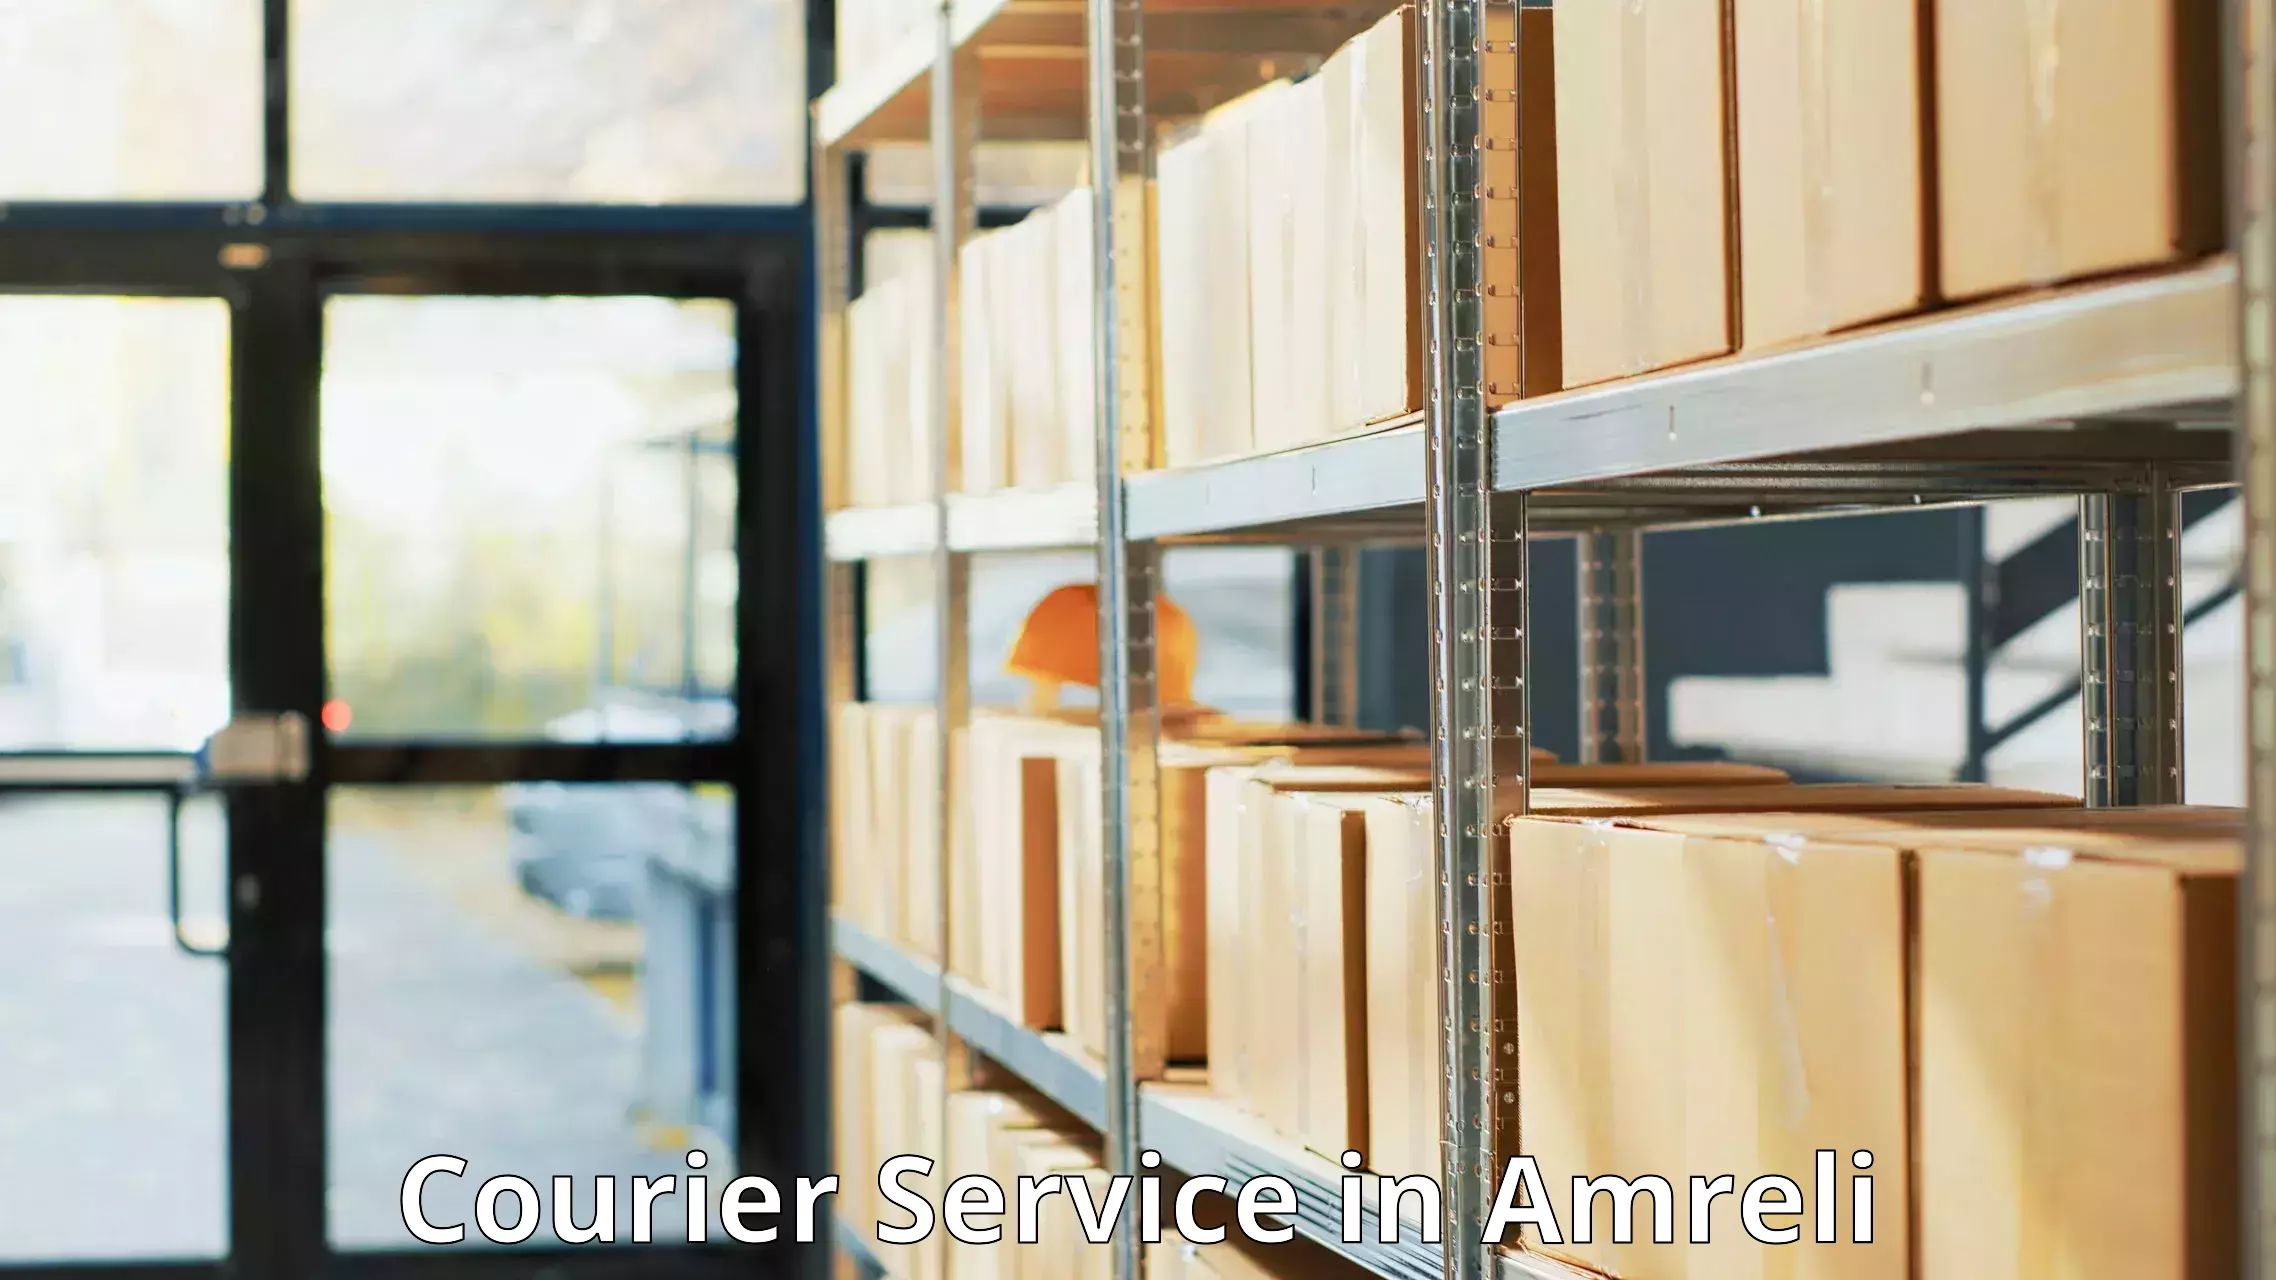 Postal and courier services in Amreli